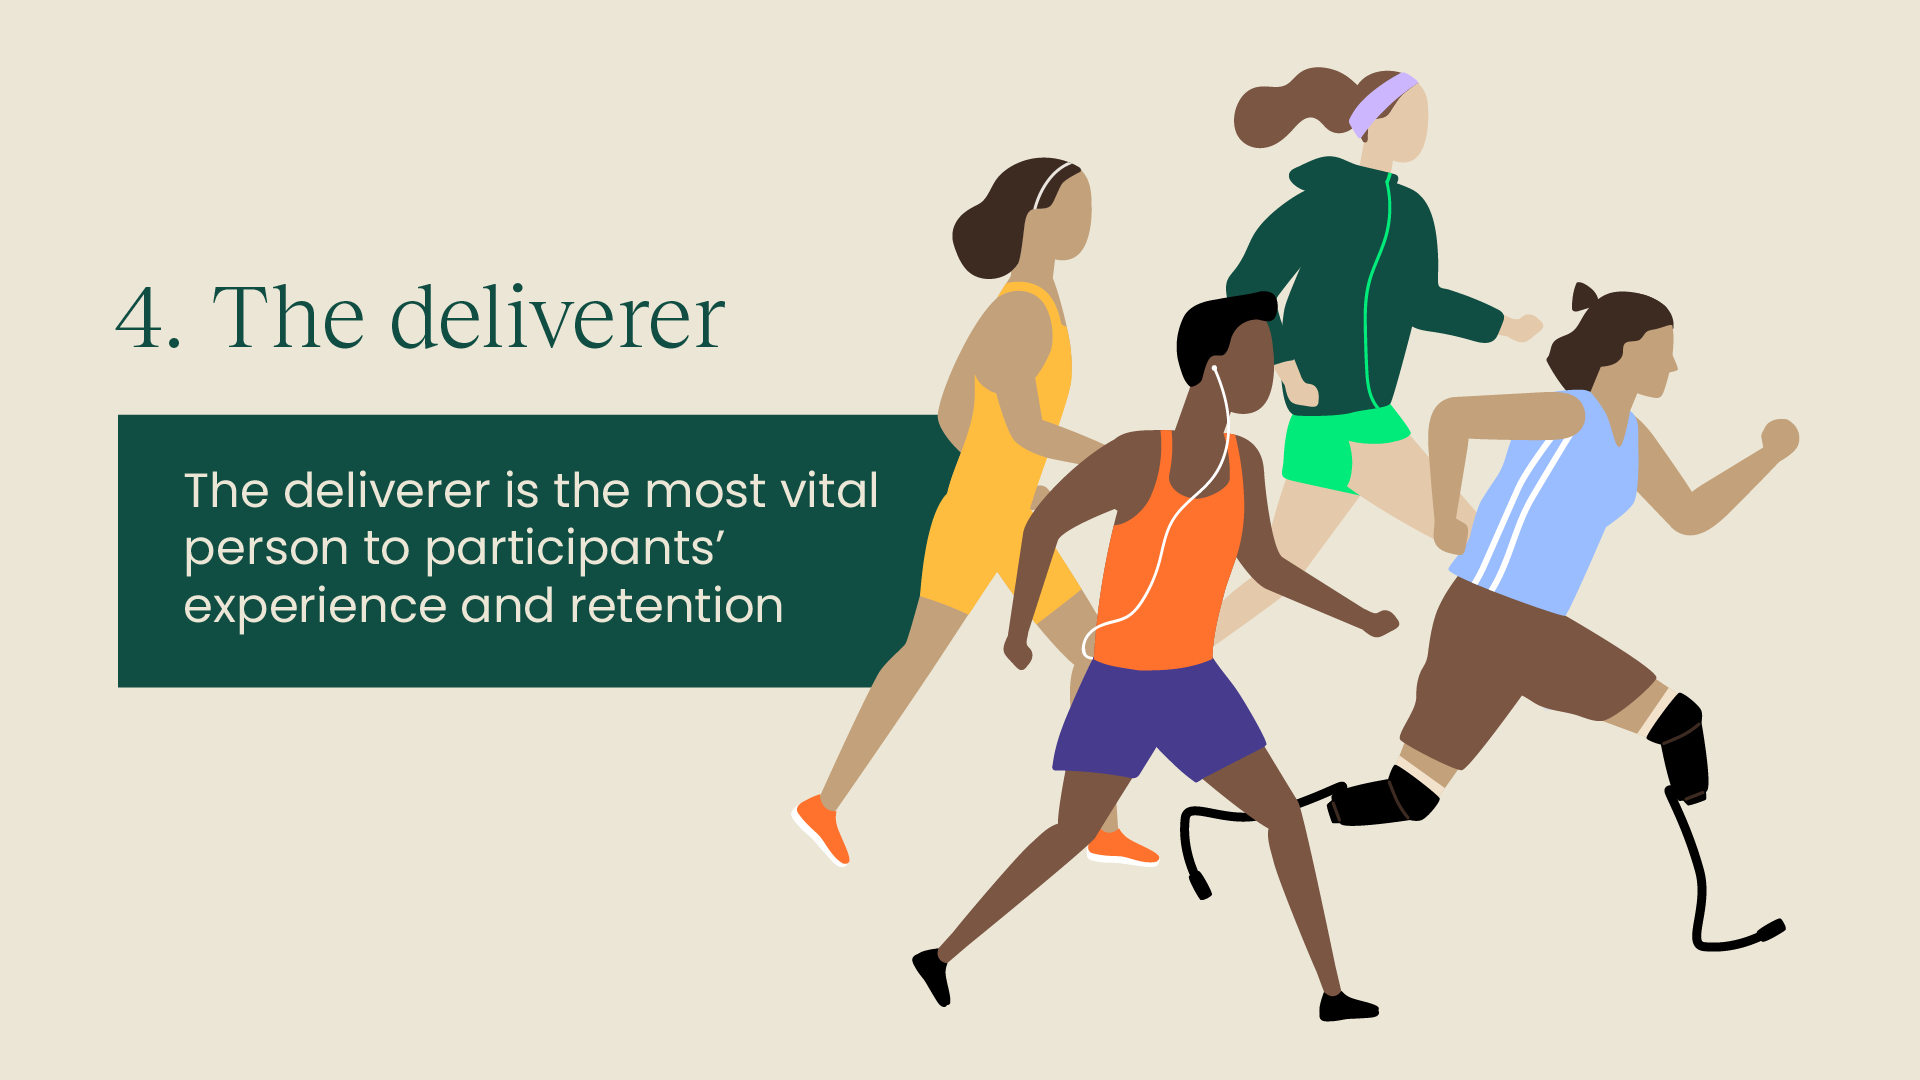 4 - The deliverer - The deliverer is the most vital person to participants' experience and retention